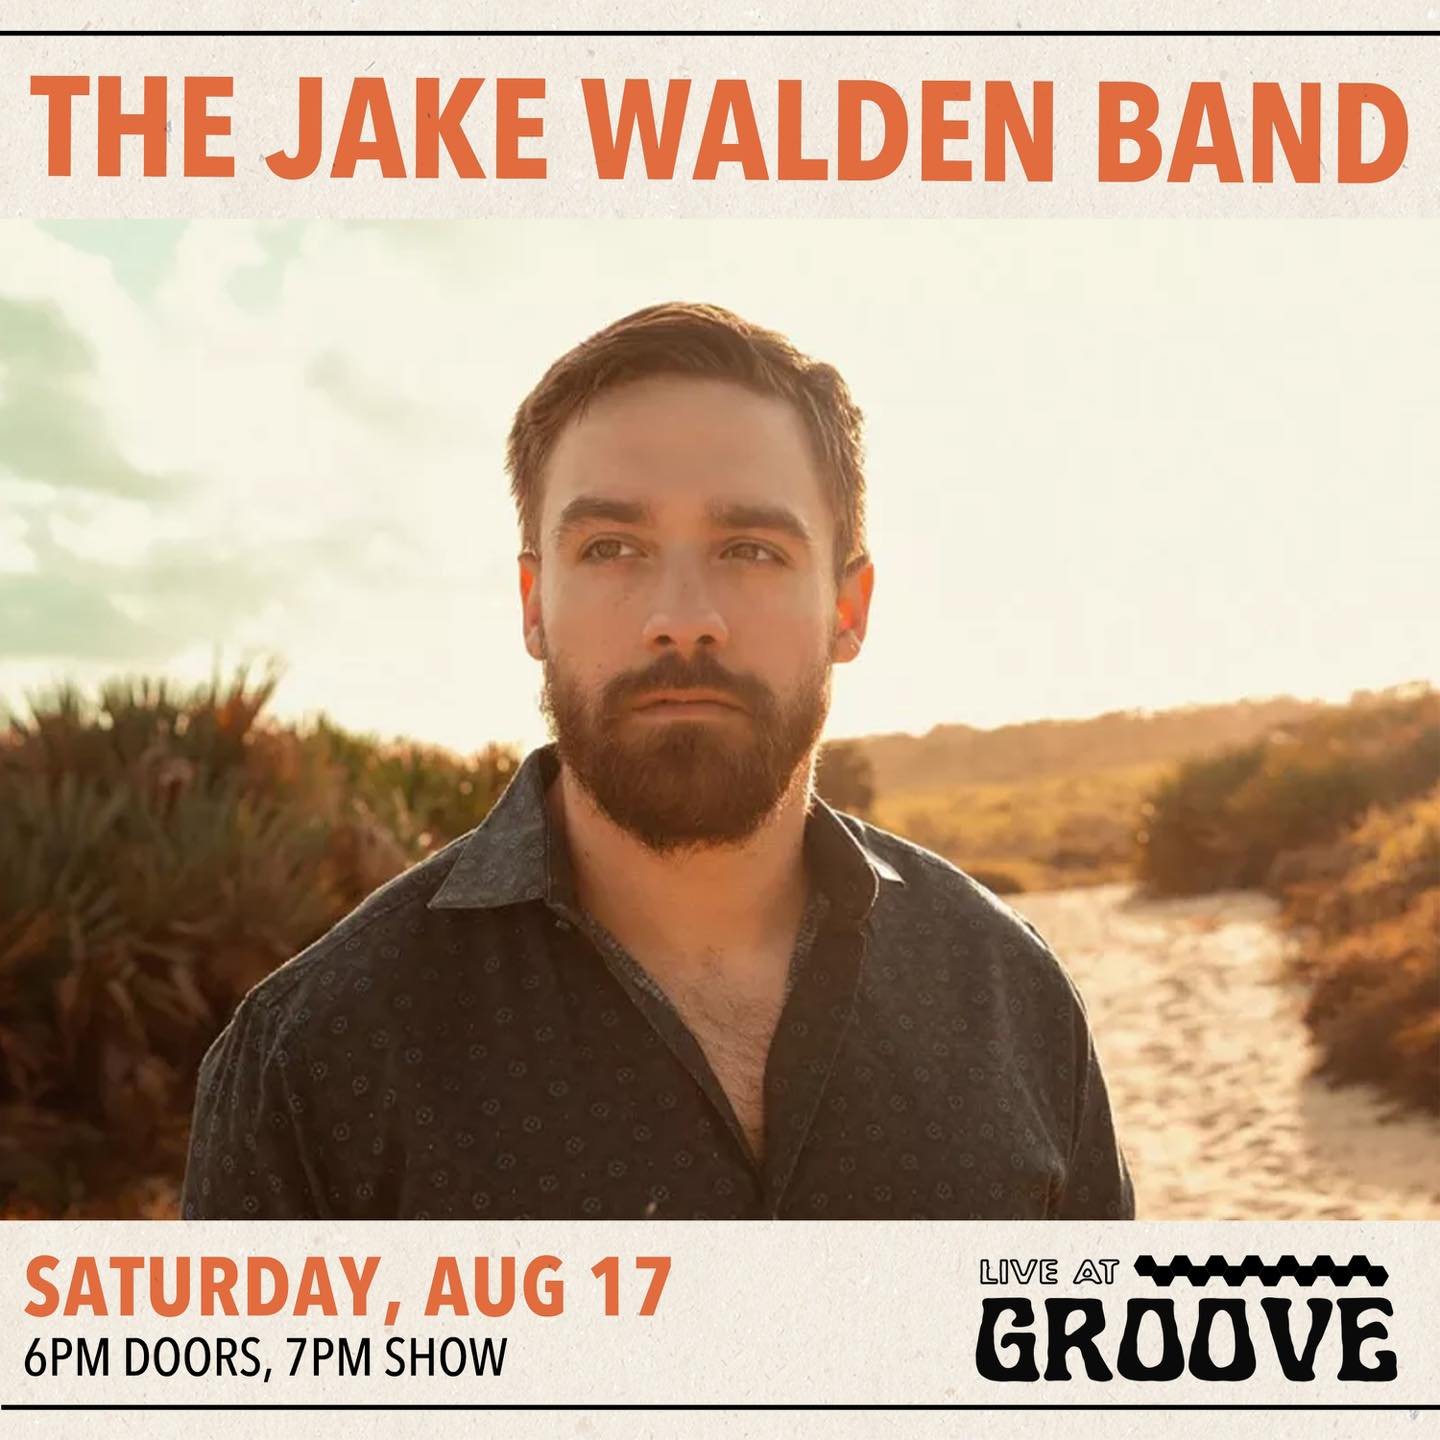 JWB is excited to announce their NYC debut @clubgroovenyc on 08/17! It&rsquo;s been a minute since i&rsquo;ve gone back to the Northeast. Friends and family wya? #clubgroovenyc #clubgroove #nyc #newyork #newyorkcity #bluesrock #macdougalstreet #green